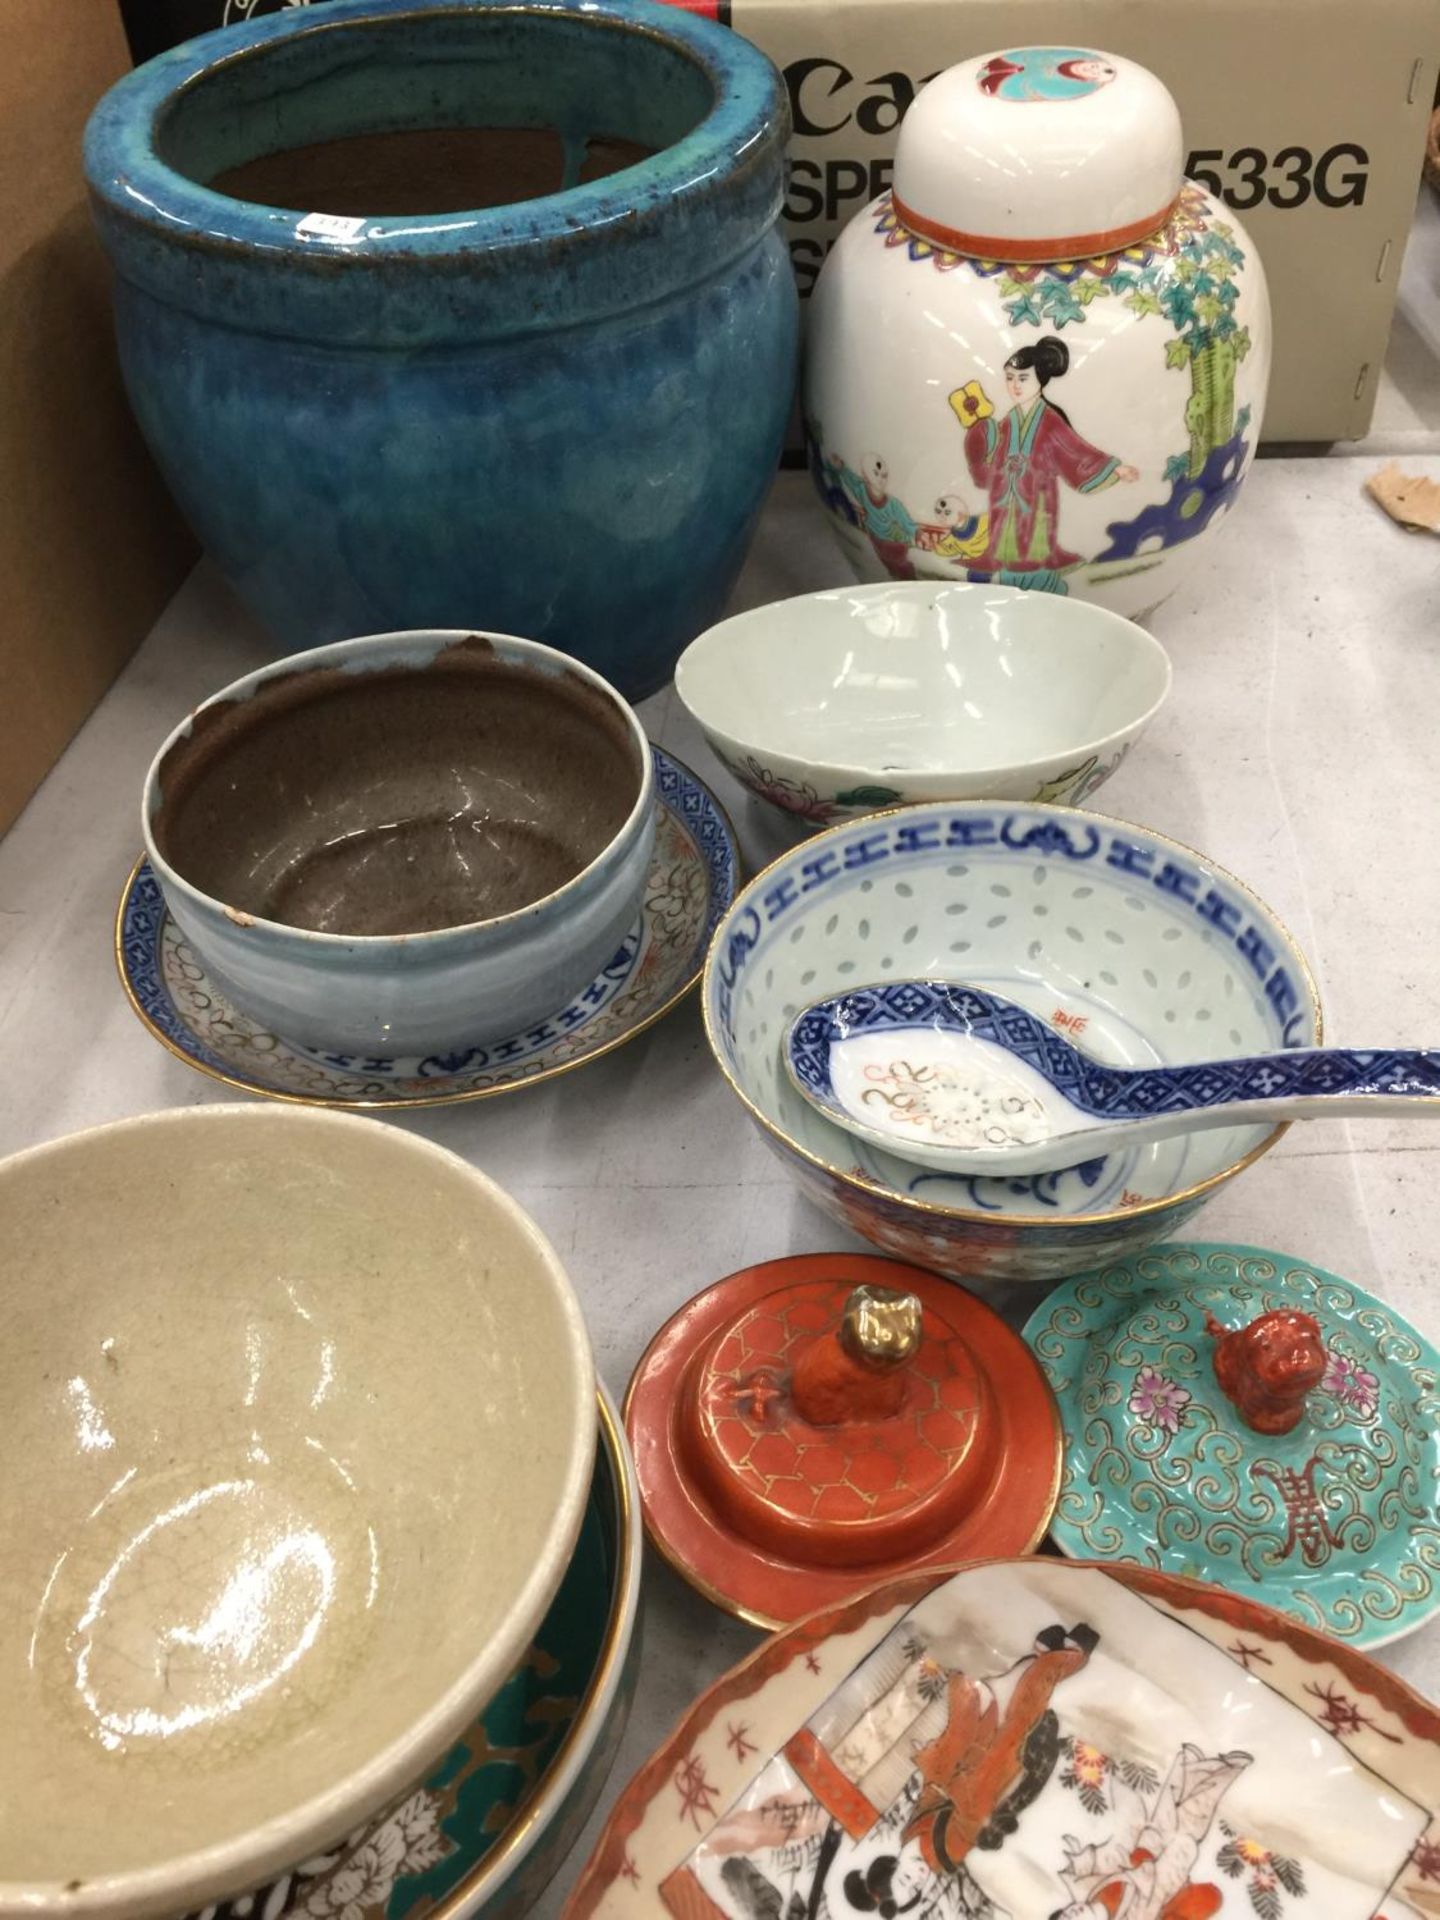 A LARGE QUANTITY OF ORIENTAL ITEMS TO INCLUDE PLATES, A PLANTER, GINGER JAR, BOWLS, CUPS, ETC - Image 2 of 3